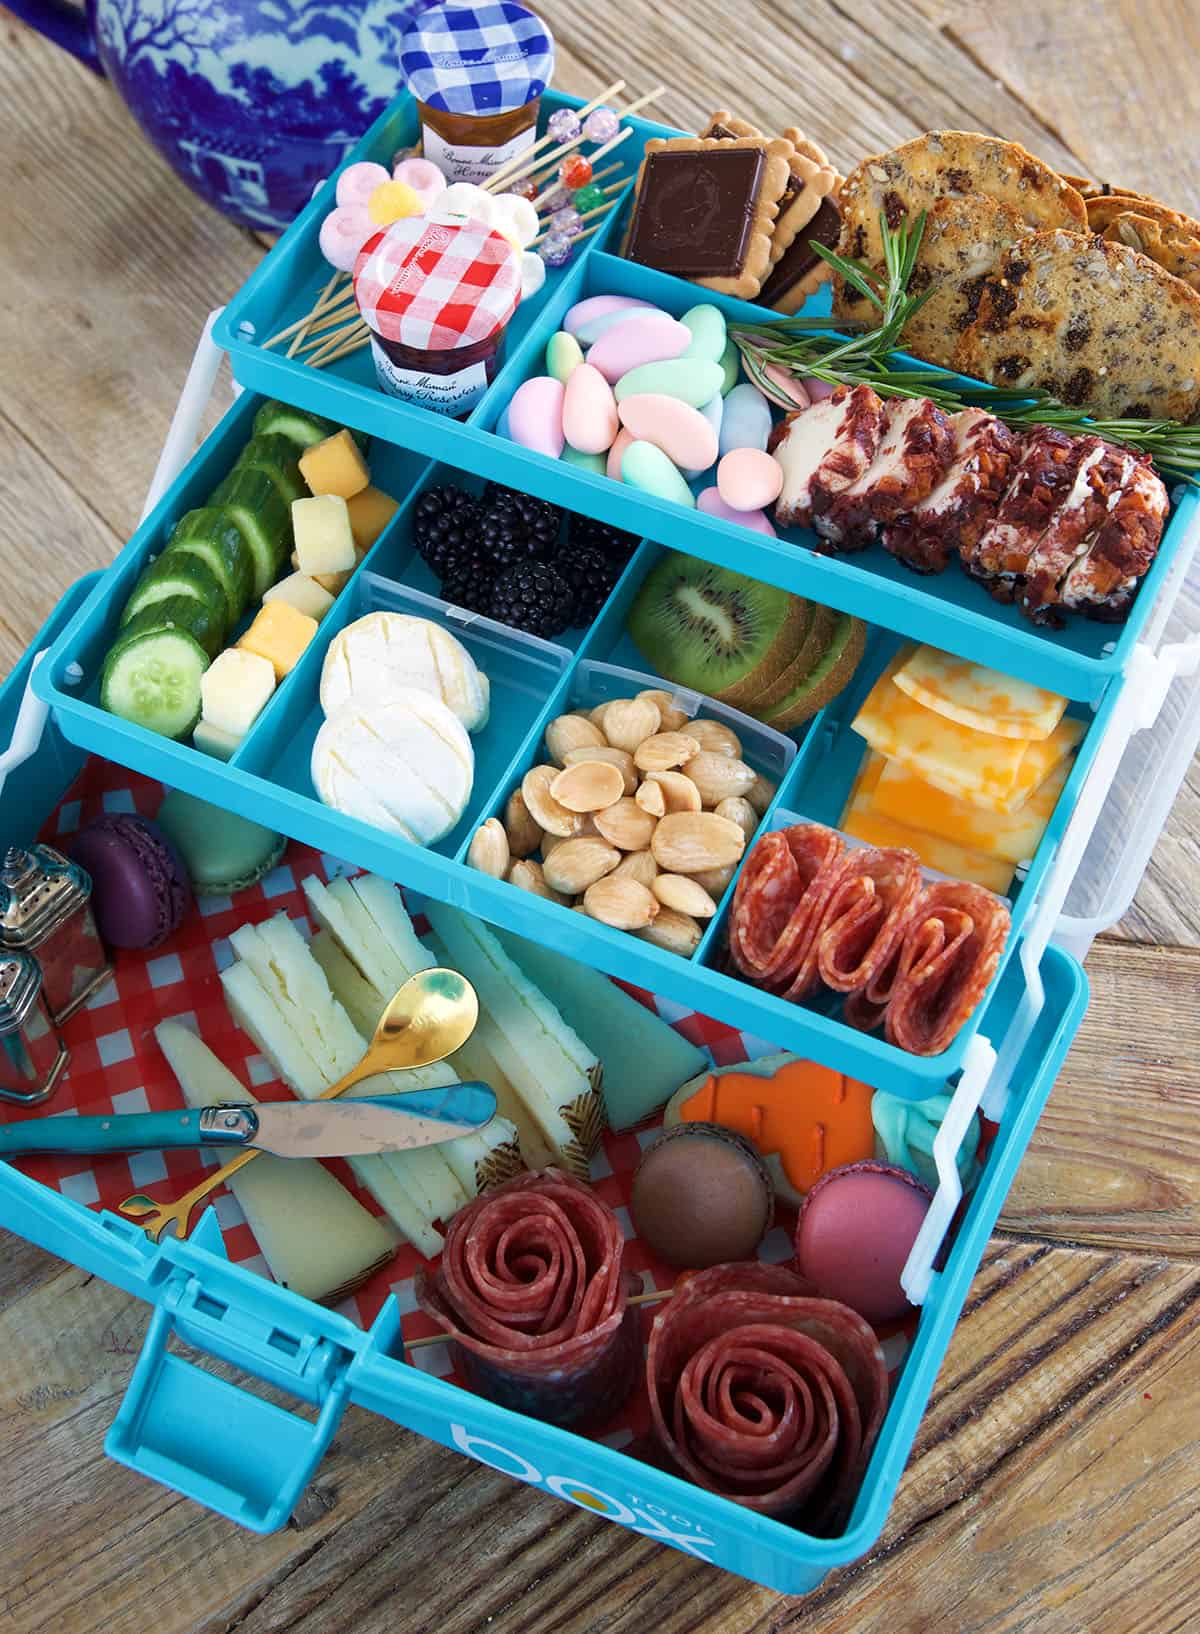 A tiered blue tackle box is filled with all different snacks.